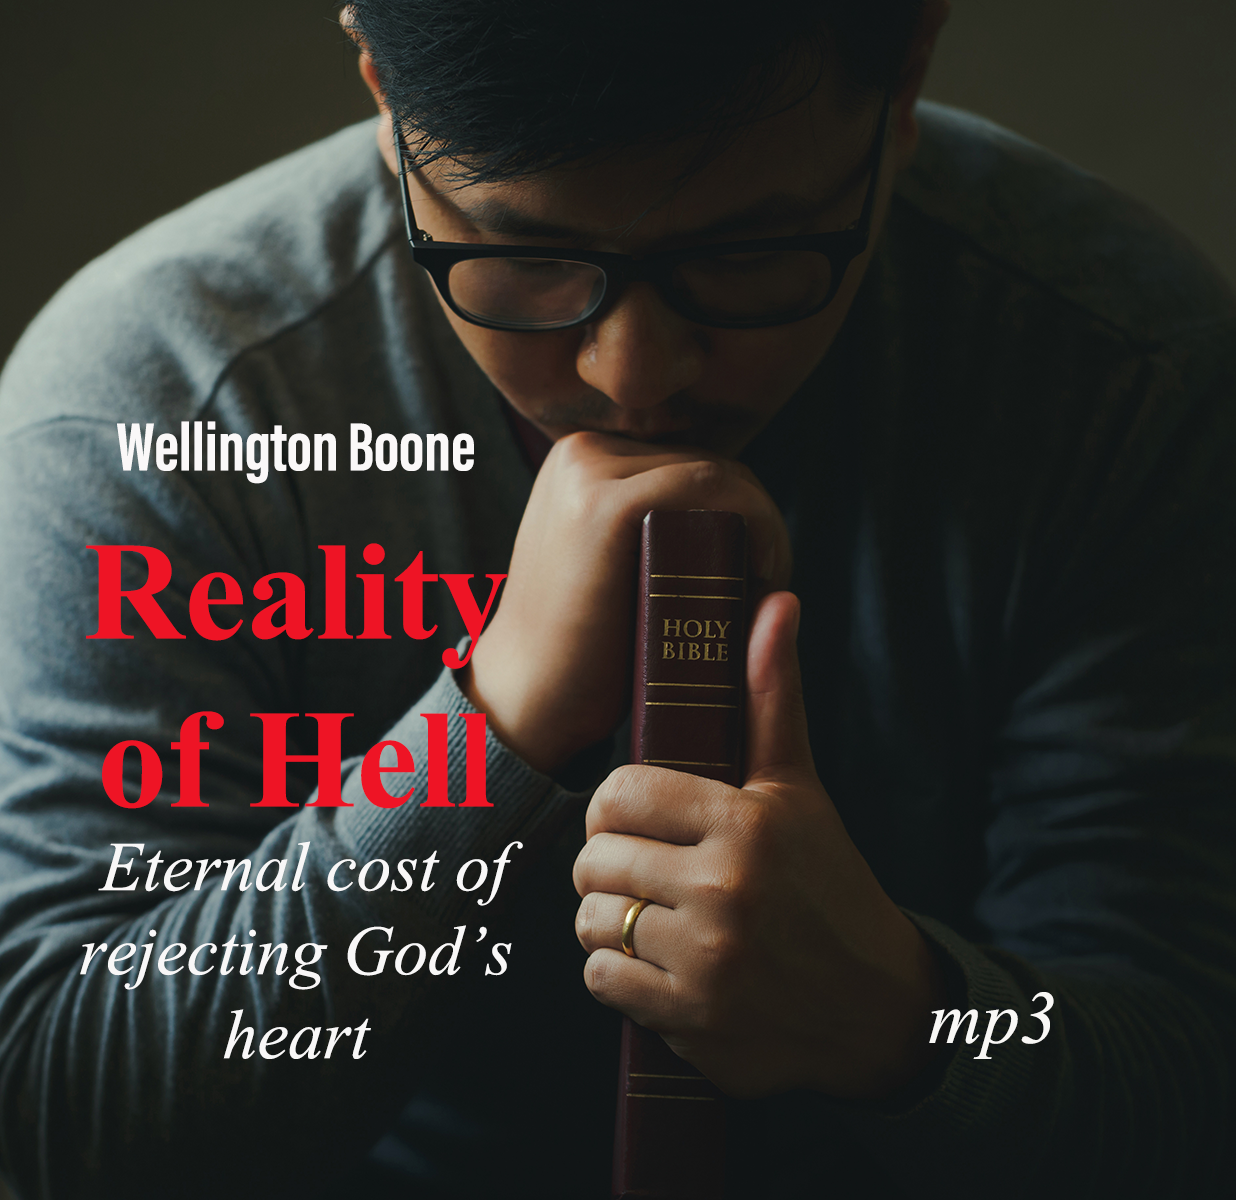 Reality of Hell: Eternal cost of rejecting God's heart